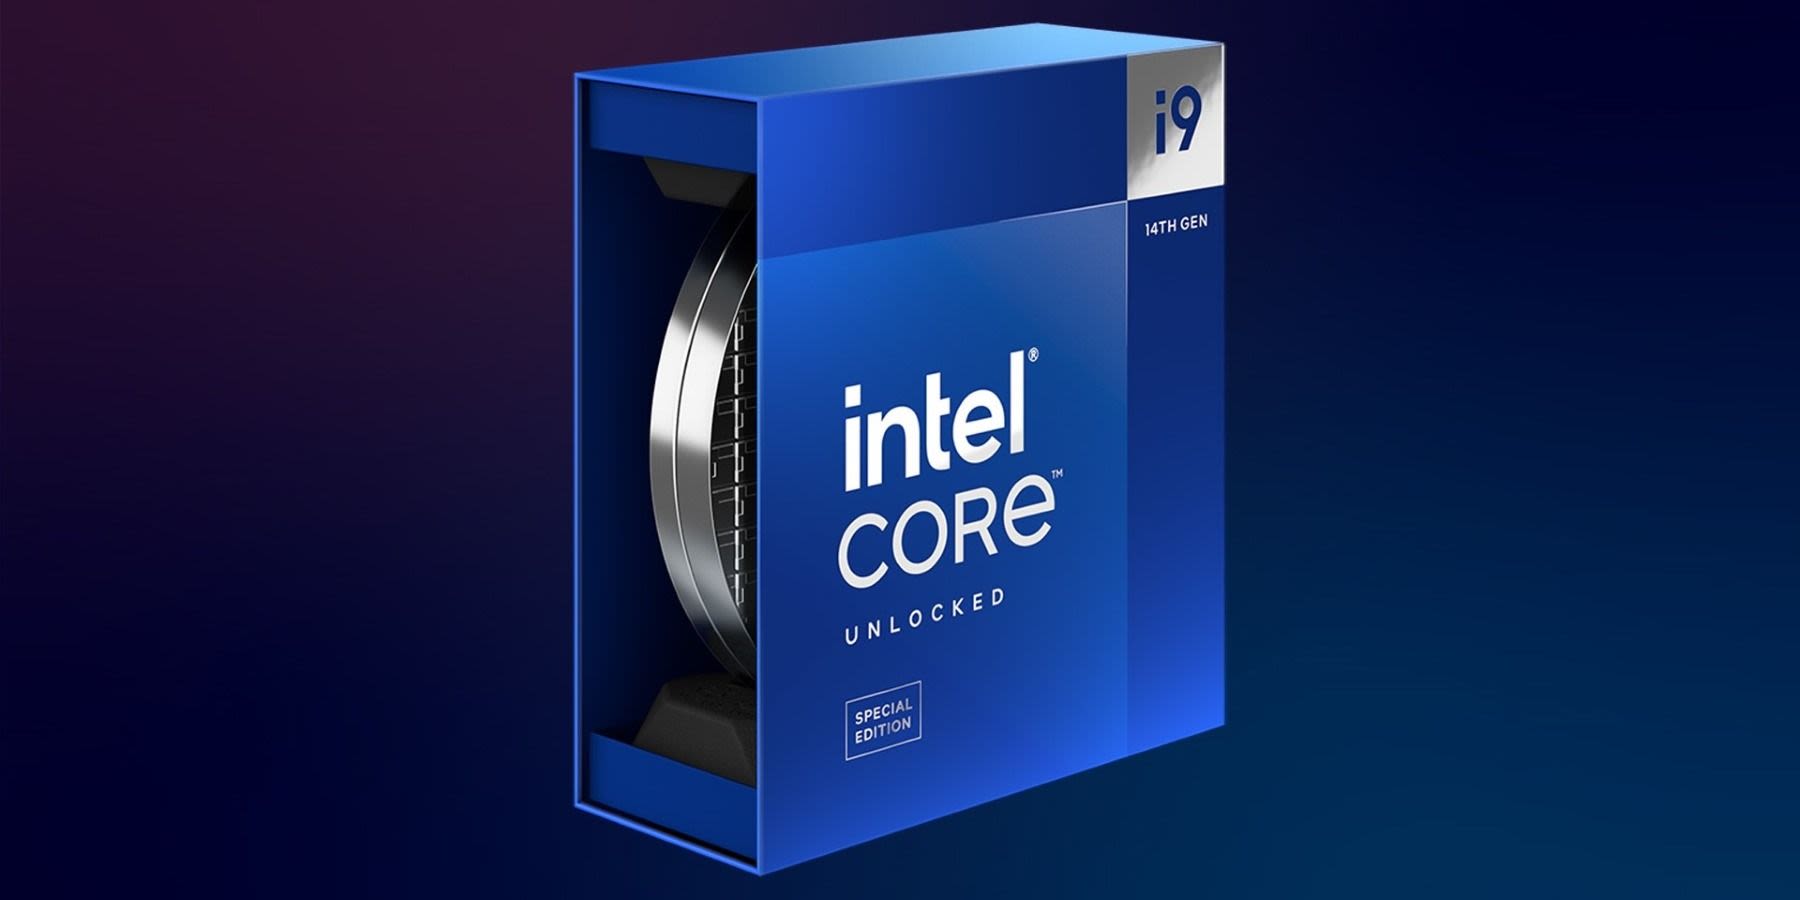 Intel Responds to Core i9 Stability Issues